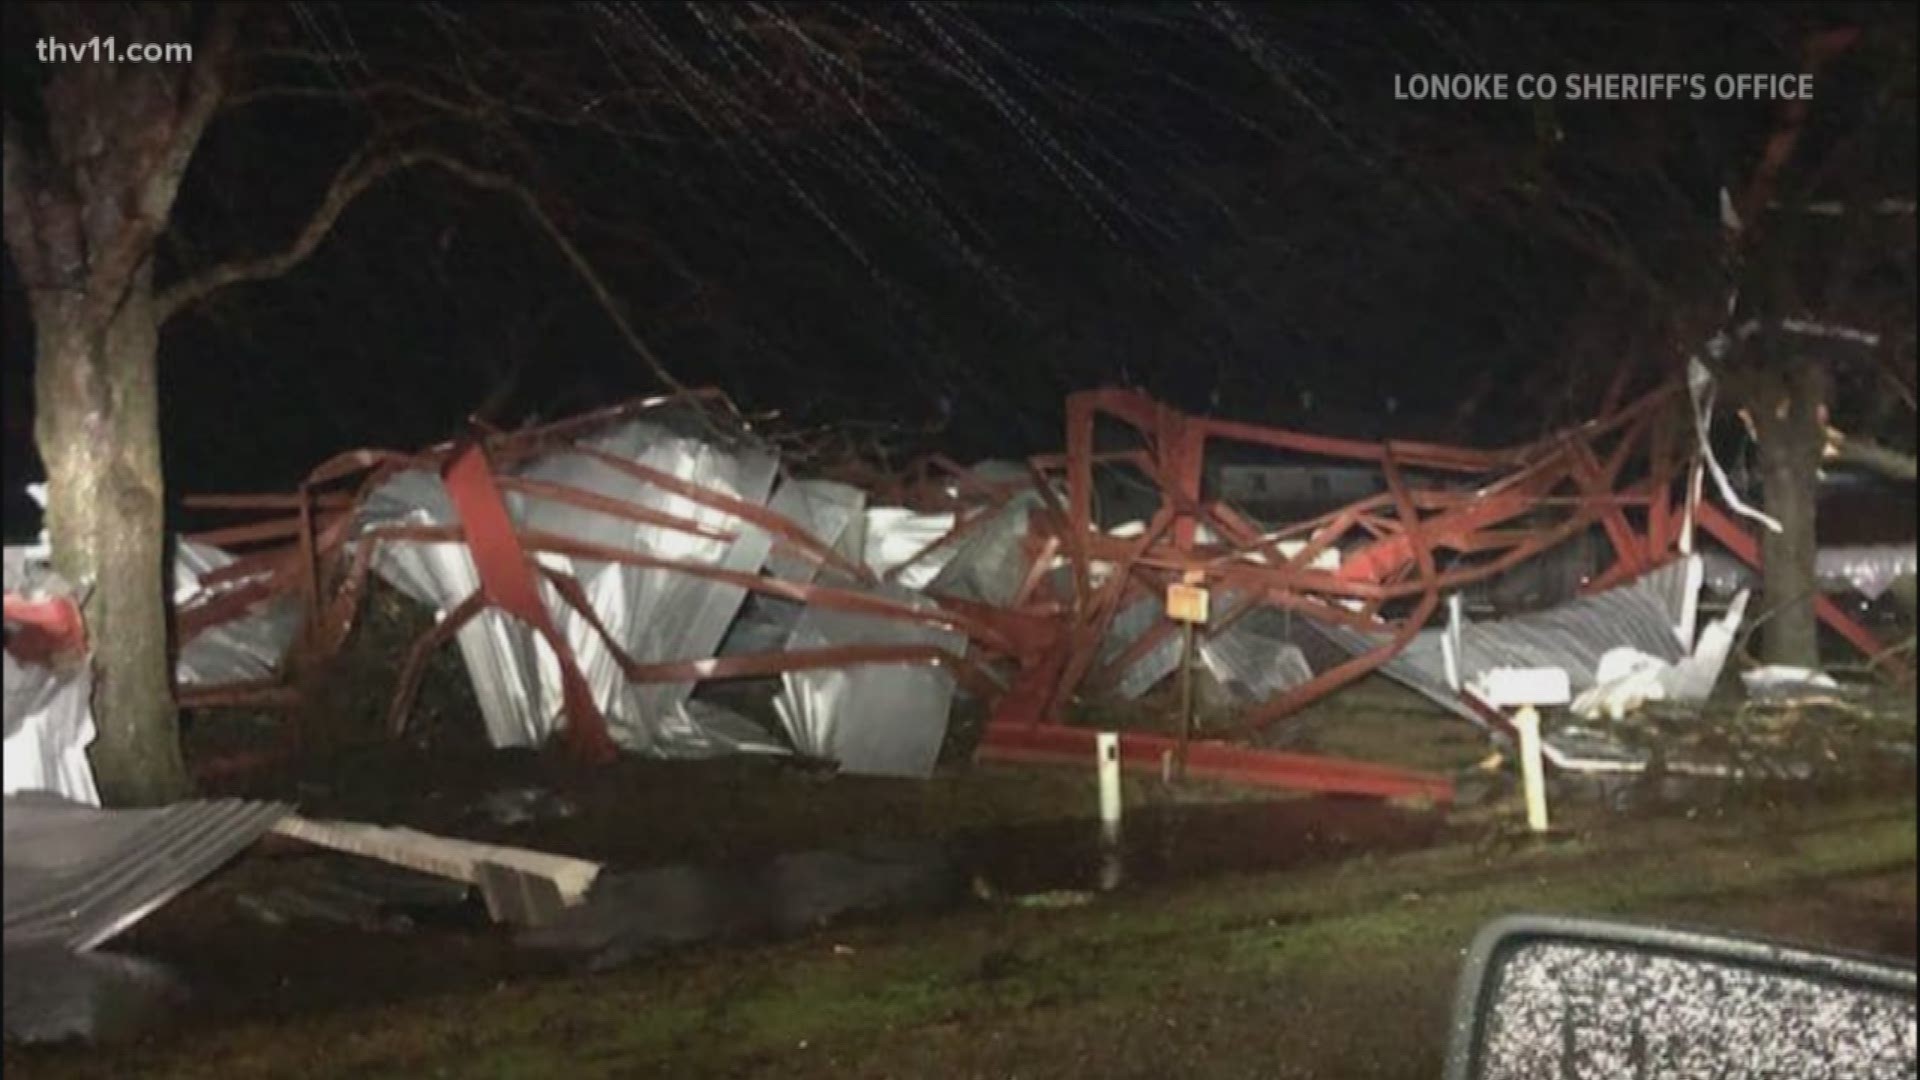 Storm Damage Flooding Around Arkansas After Severe Weather Hits